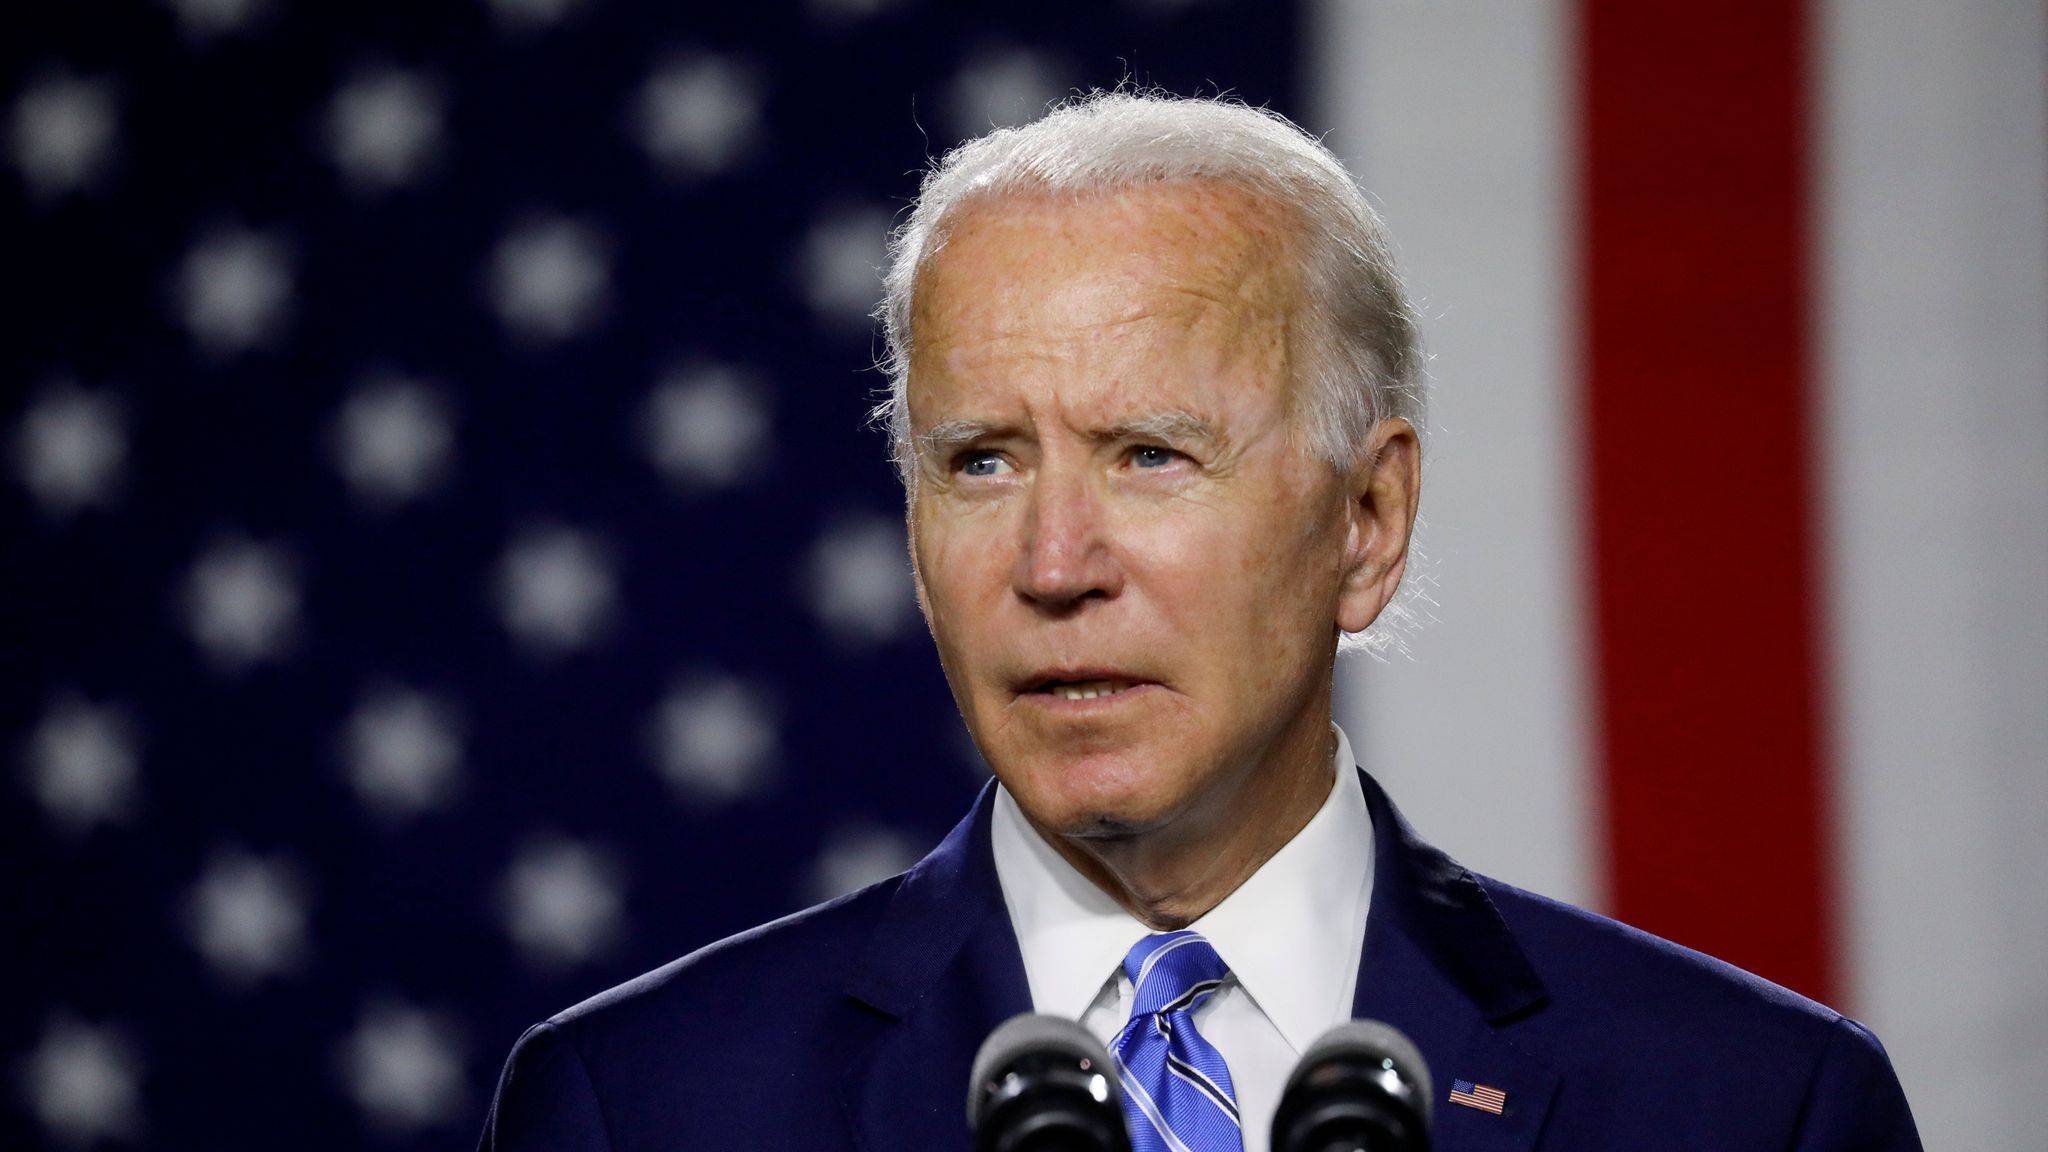 US election results Joe Biden projected to win amid reports